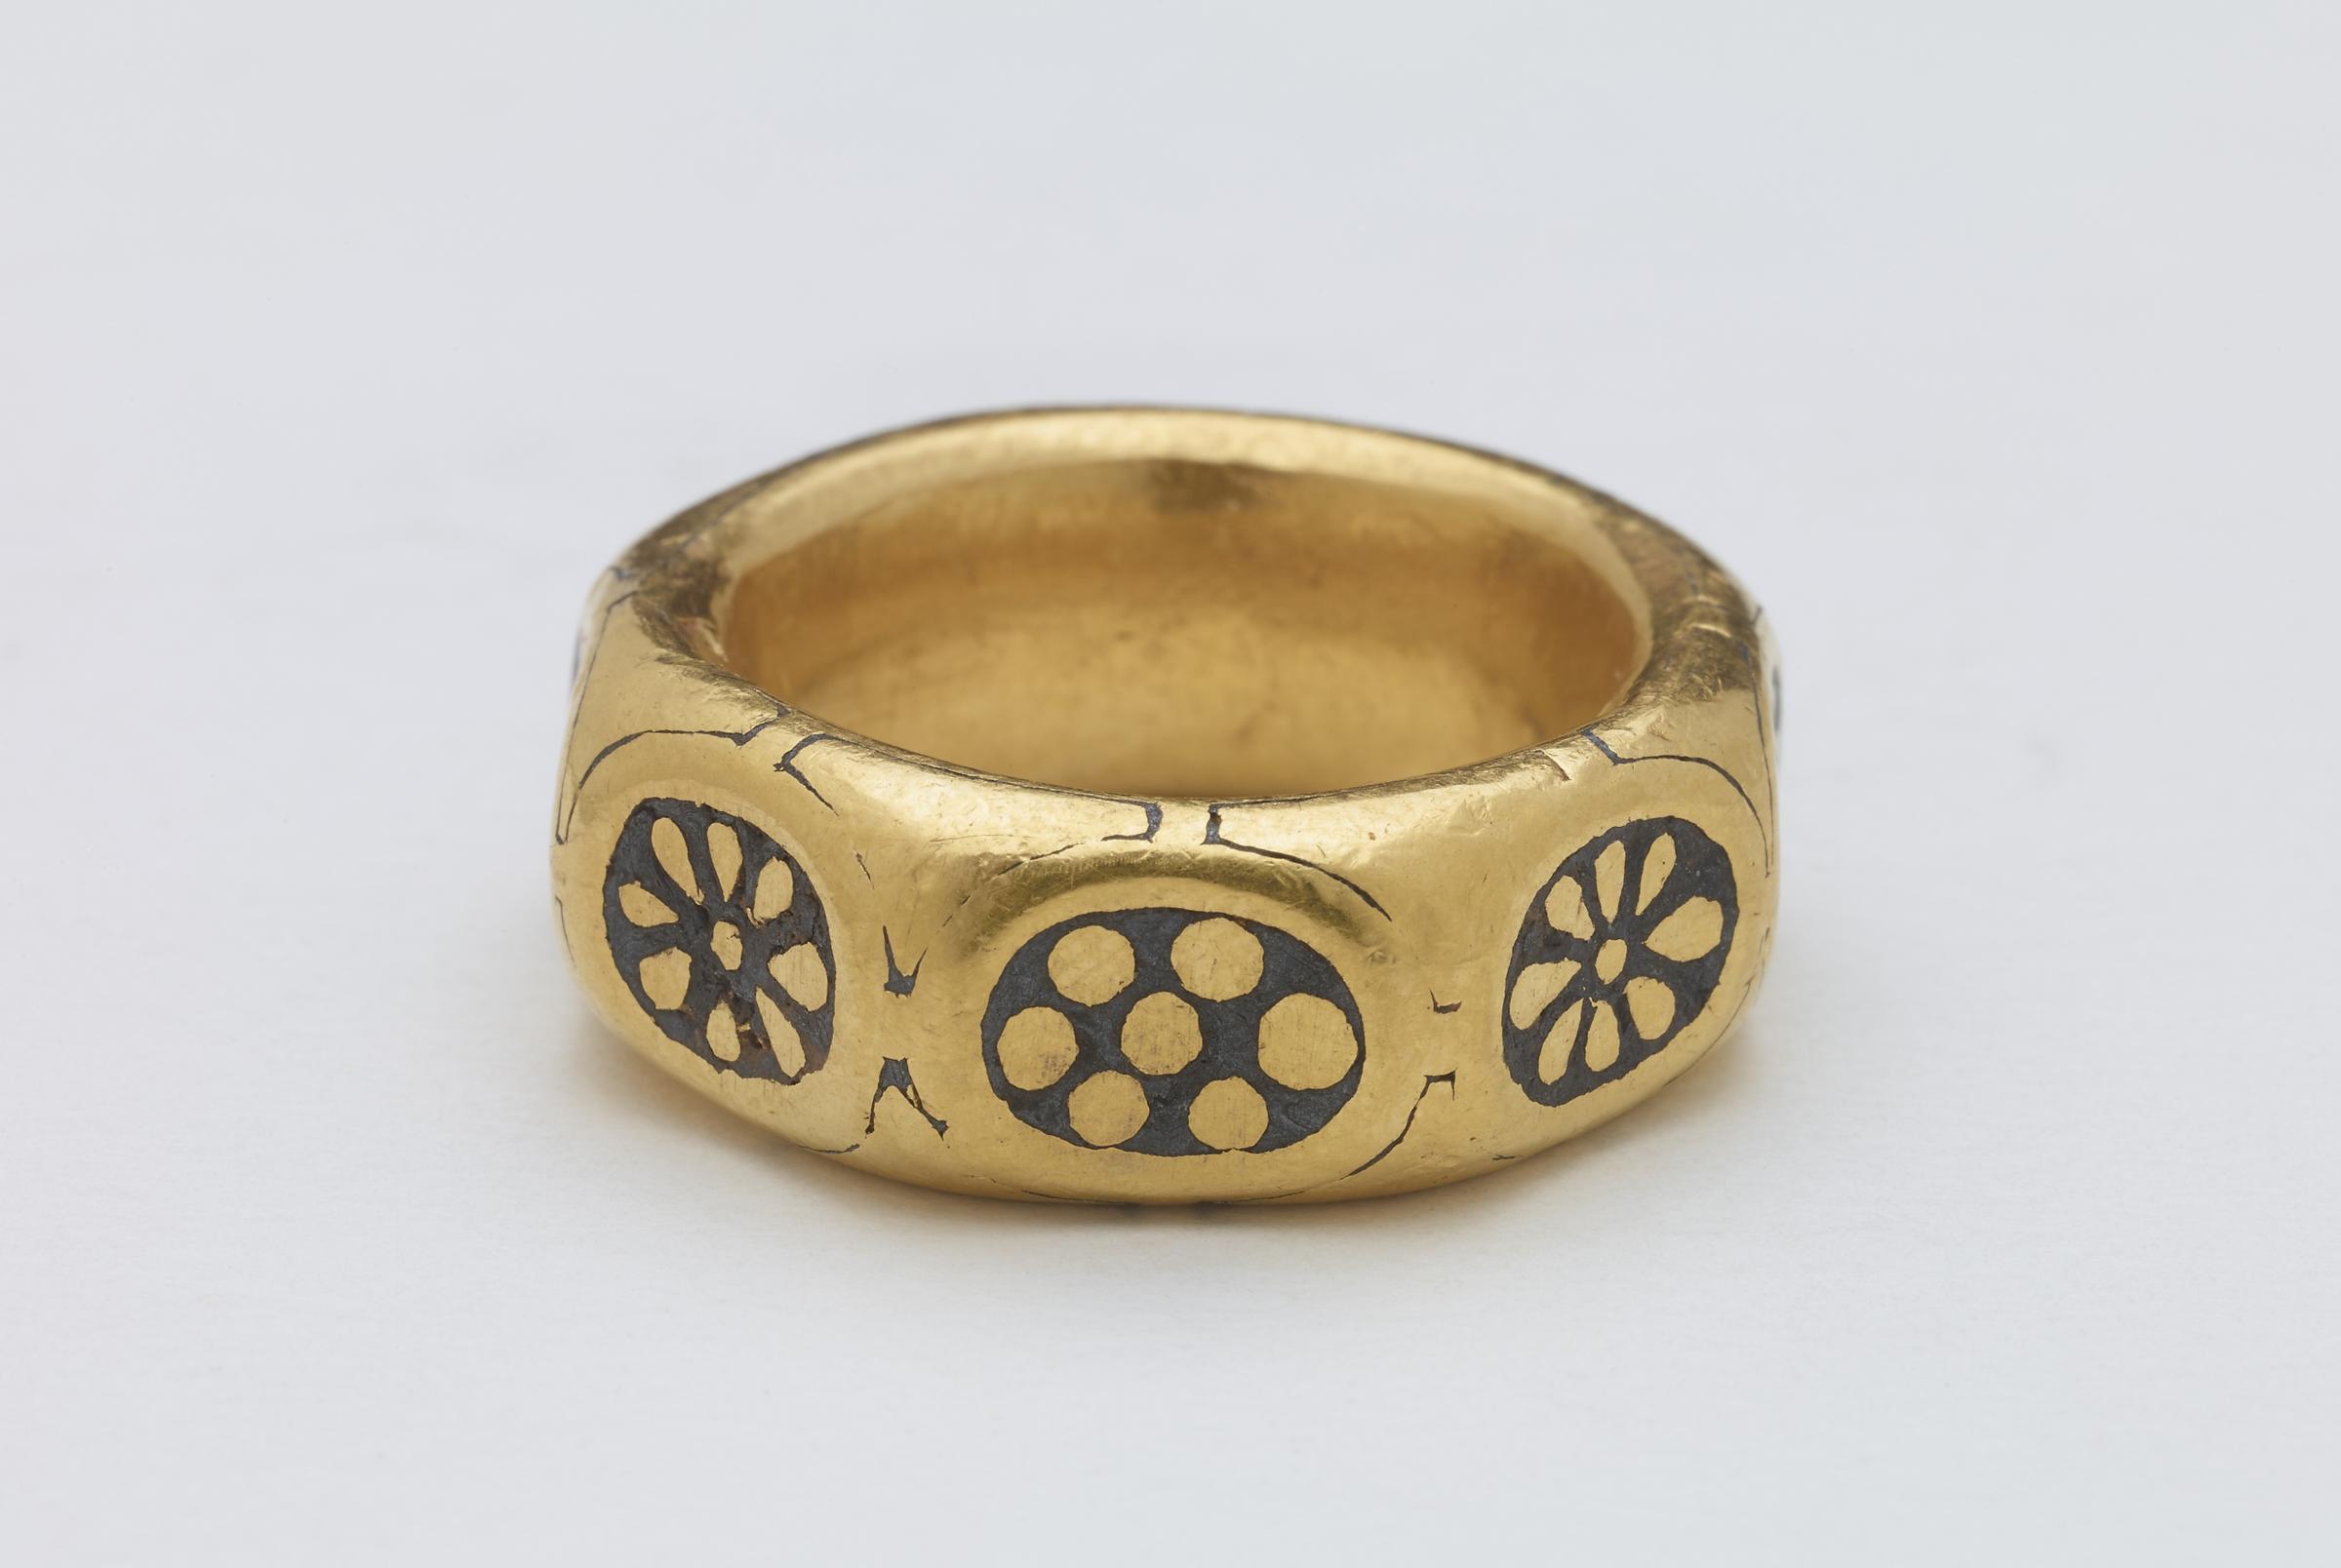 Herefordshire Hoard Viking treasure: Octagonal gold ring from the ninth century